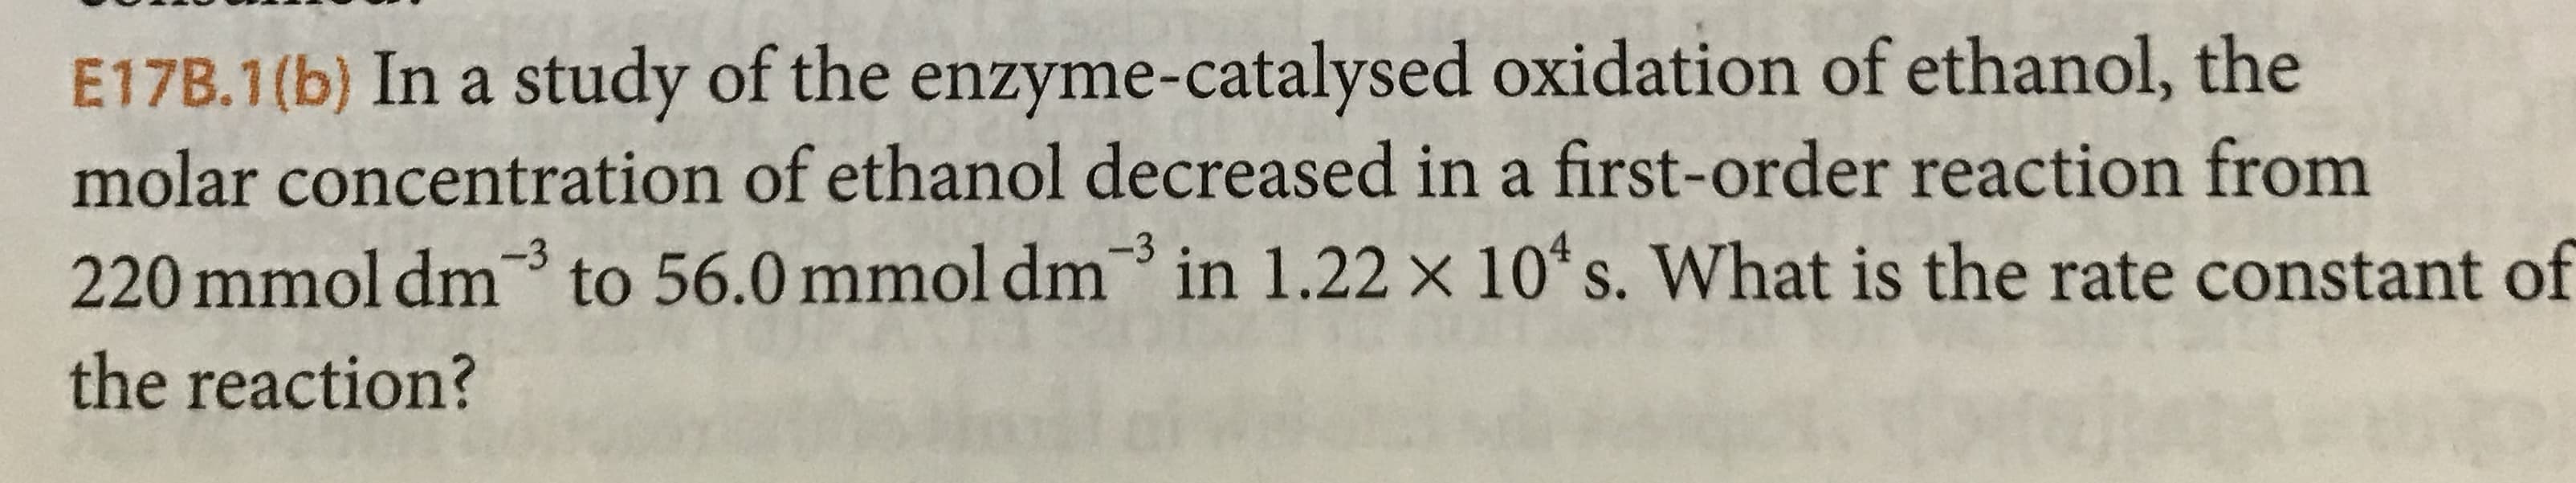 E17B.1(b) In a study of the enzyme-catalysed oxidation of ethanol, the
molar concentration of ethanol decreased in a first-order reaction from
220 mmol dm3 to 56.0 mmol dm in 1.22 x 10 s. What is the rate constant of
the reaction?
